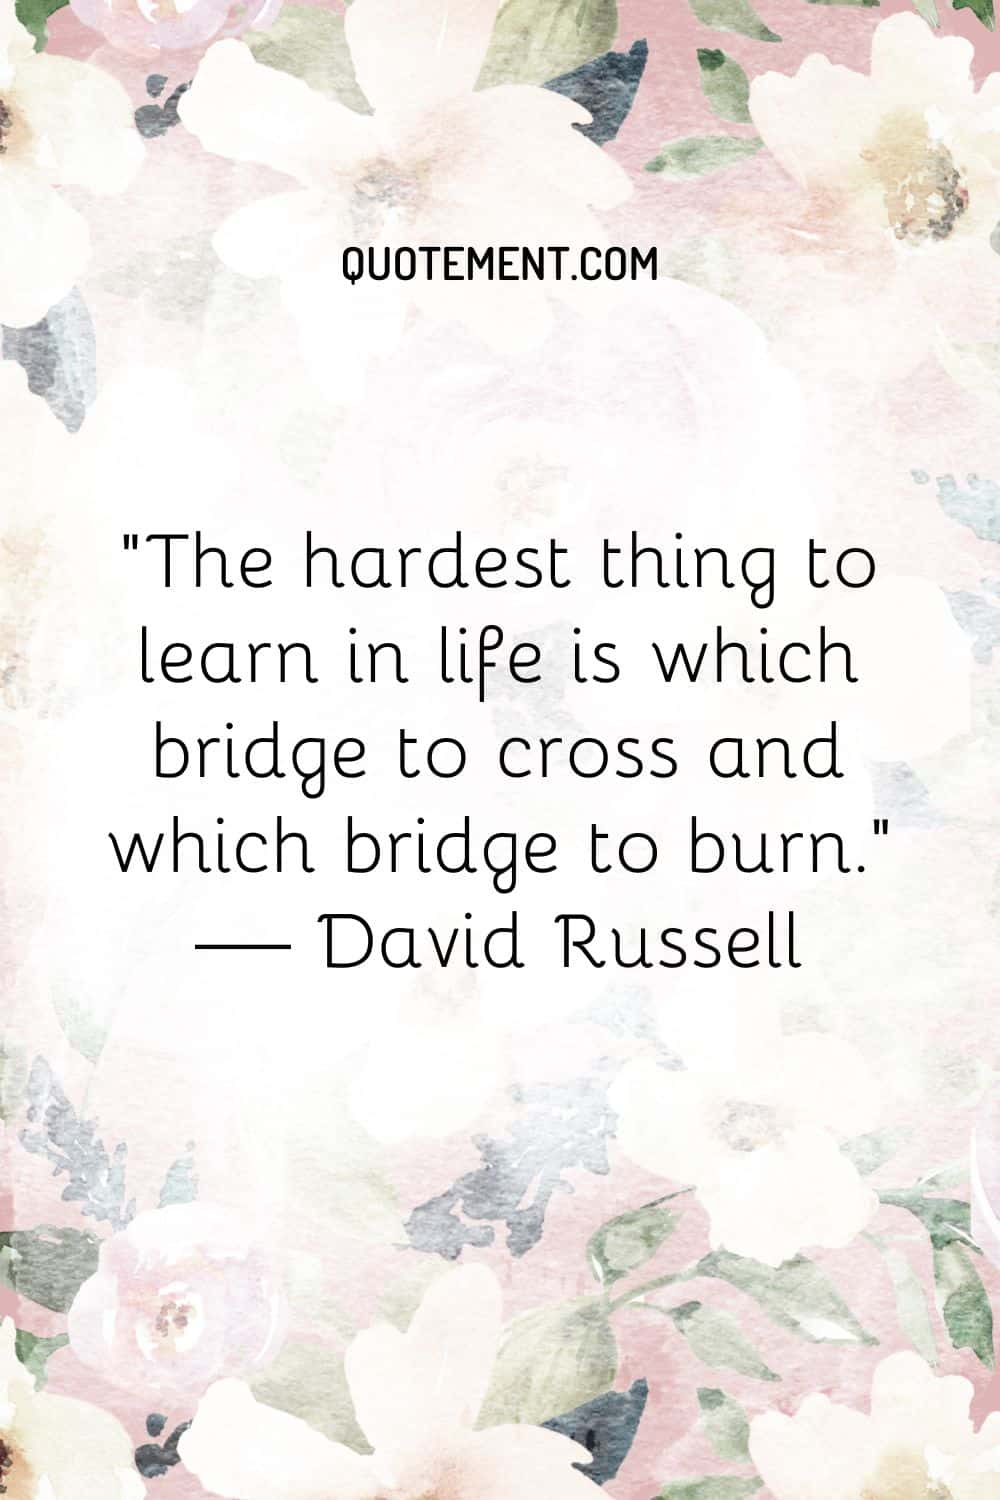 The hardest thing to learn in life is which bridge to cross and which bridge to burn